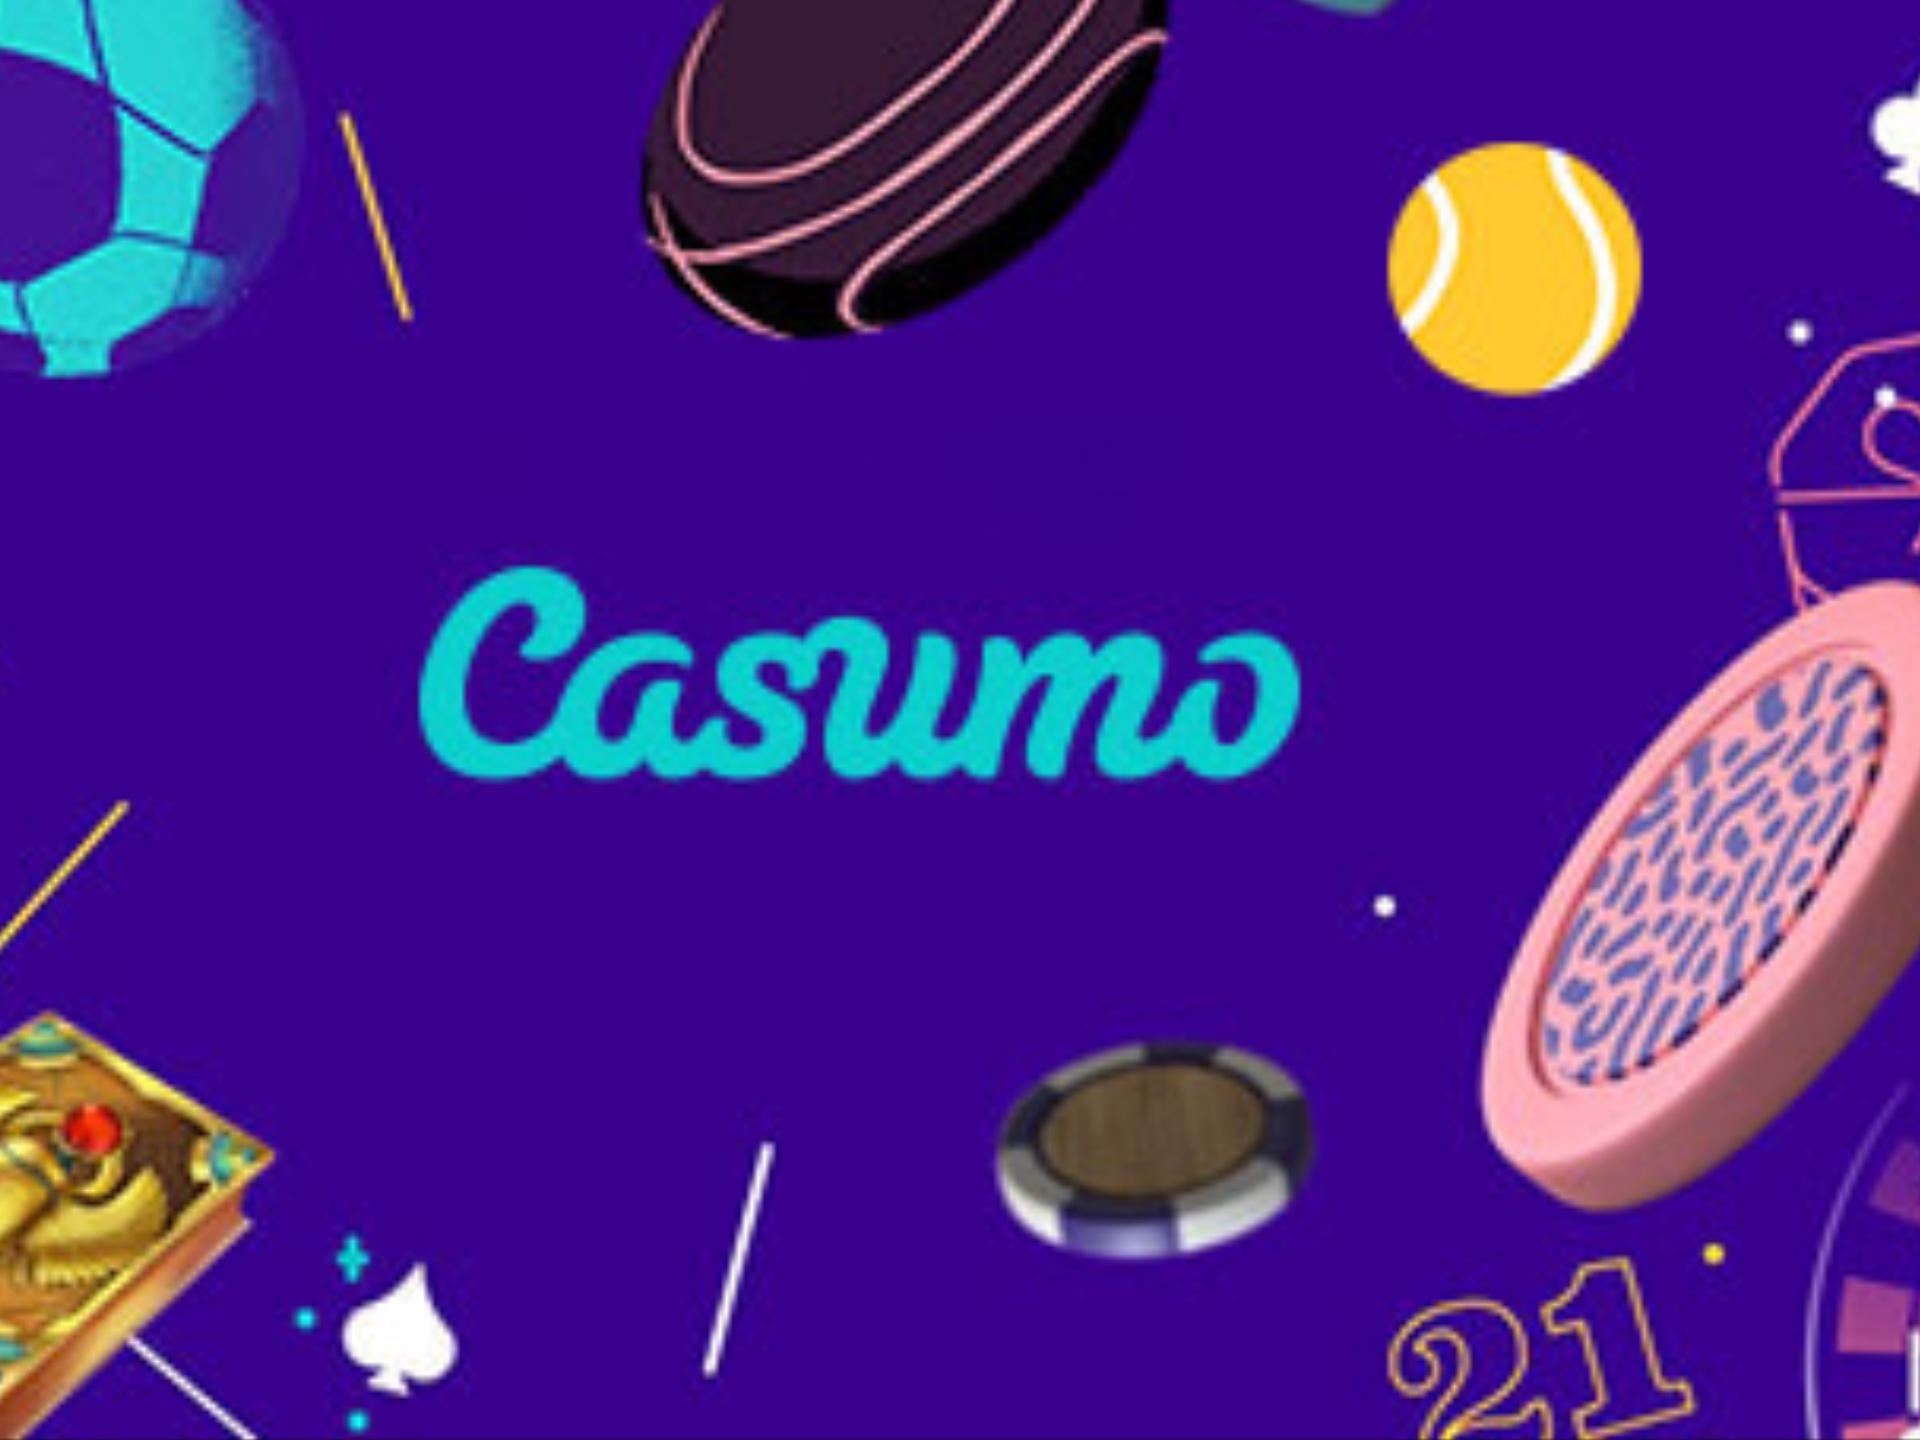 Sign up for Casumo and start gambling.